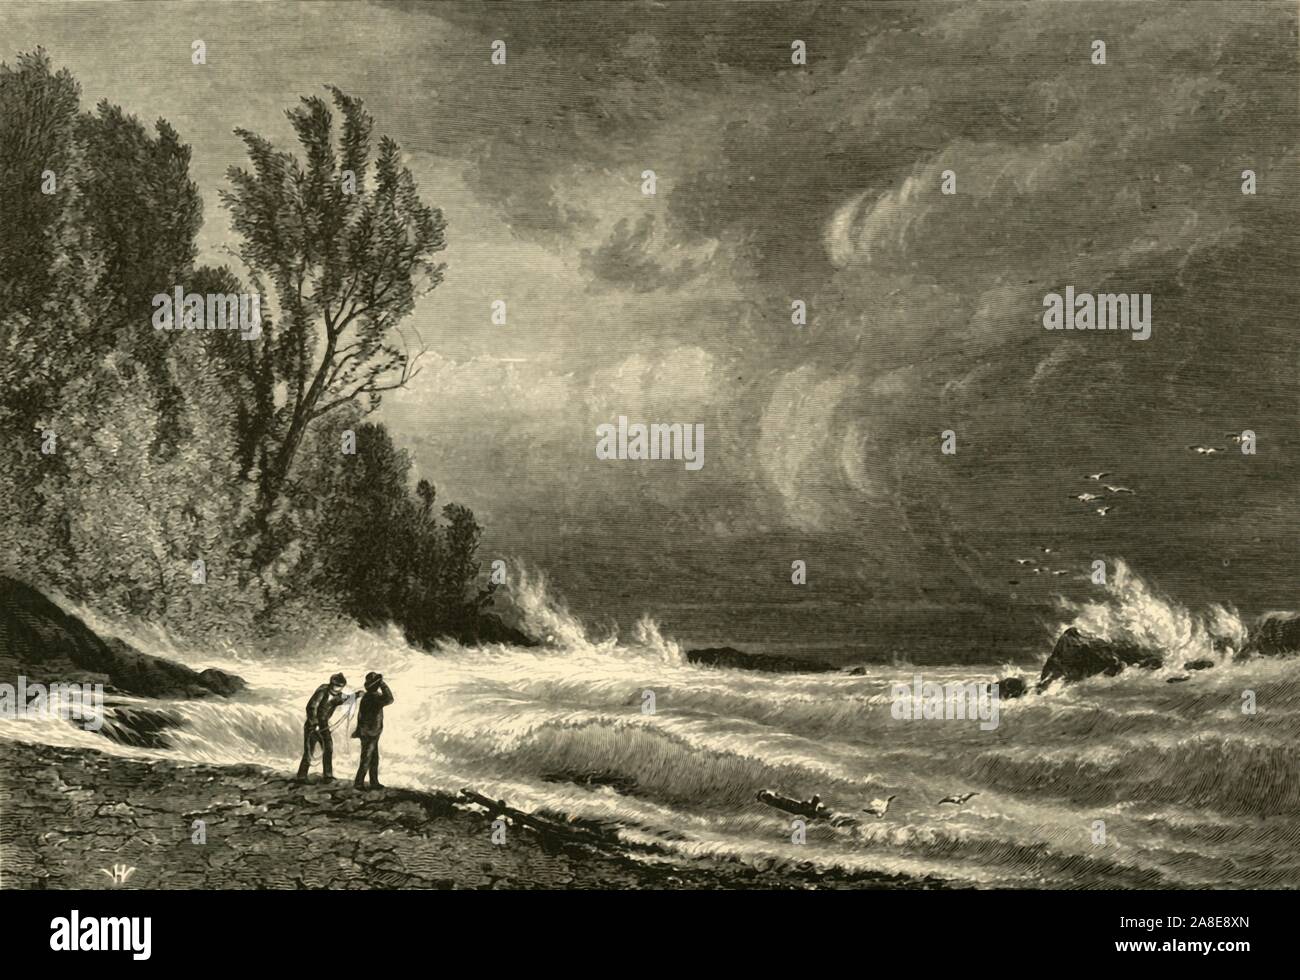 'La Crosse Harbor', 1872. Stormy weather on Lake Superior, USA. From &quot;Picturesque America; or, The Land We Live In, A Delineation by Pen and Pencil of the Mountains, Rivers, Lakes...with Illustrations on Steel and Wood by Eminent American Artists&quot; Vol. I, edited by William Cullen Bryant. [D. Appleton and Company, New York, 1872] Stock Photo